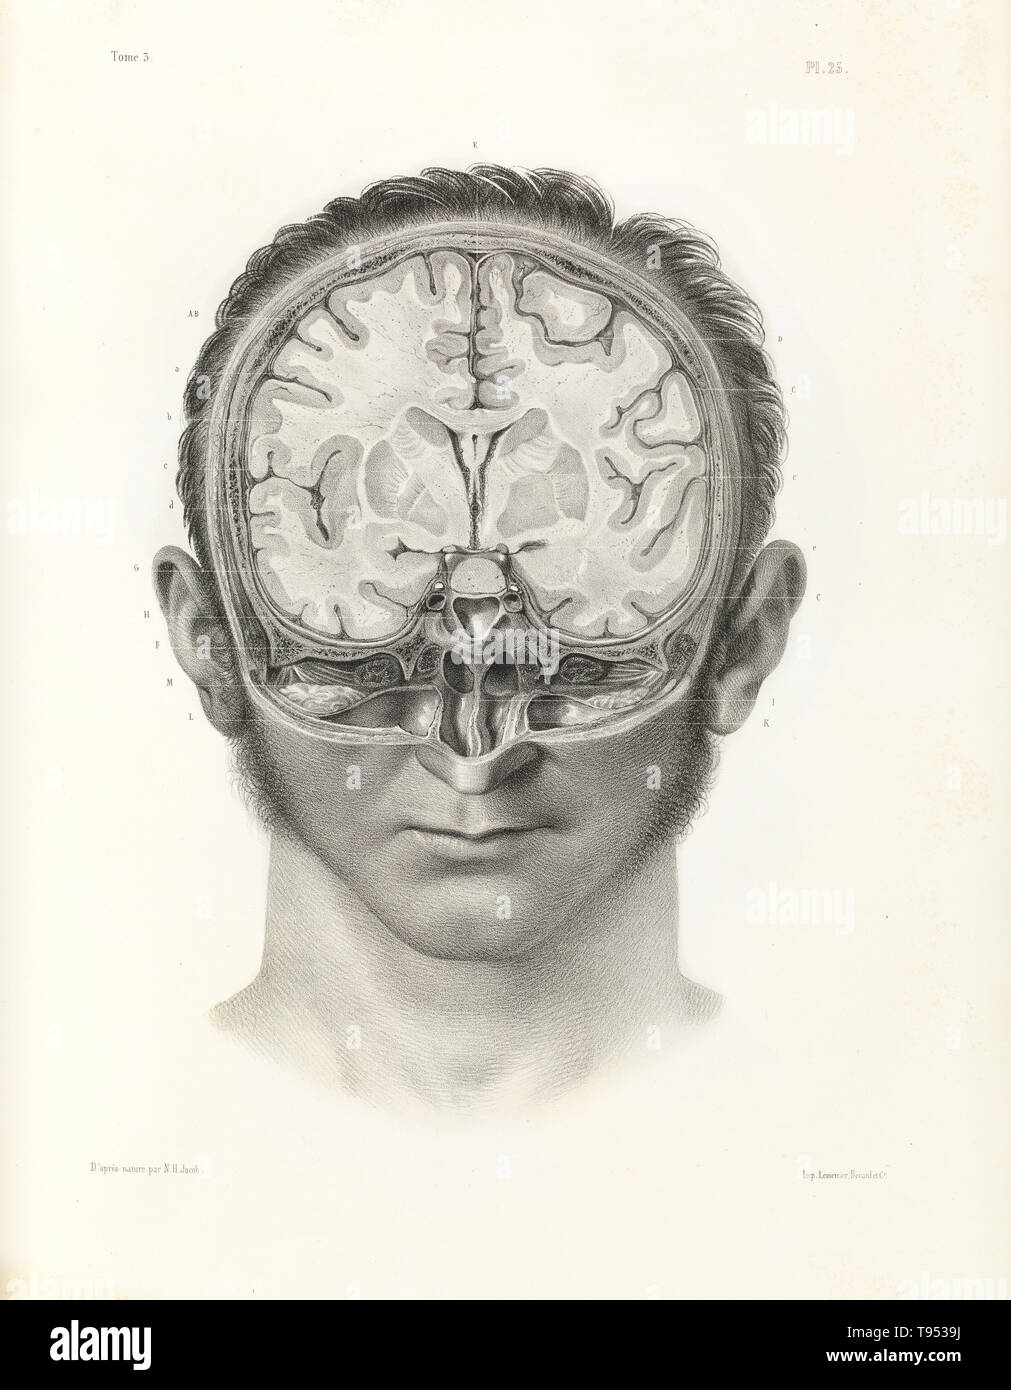 Vertical cross section of the human brain, 1844. Stock Photo